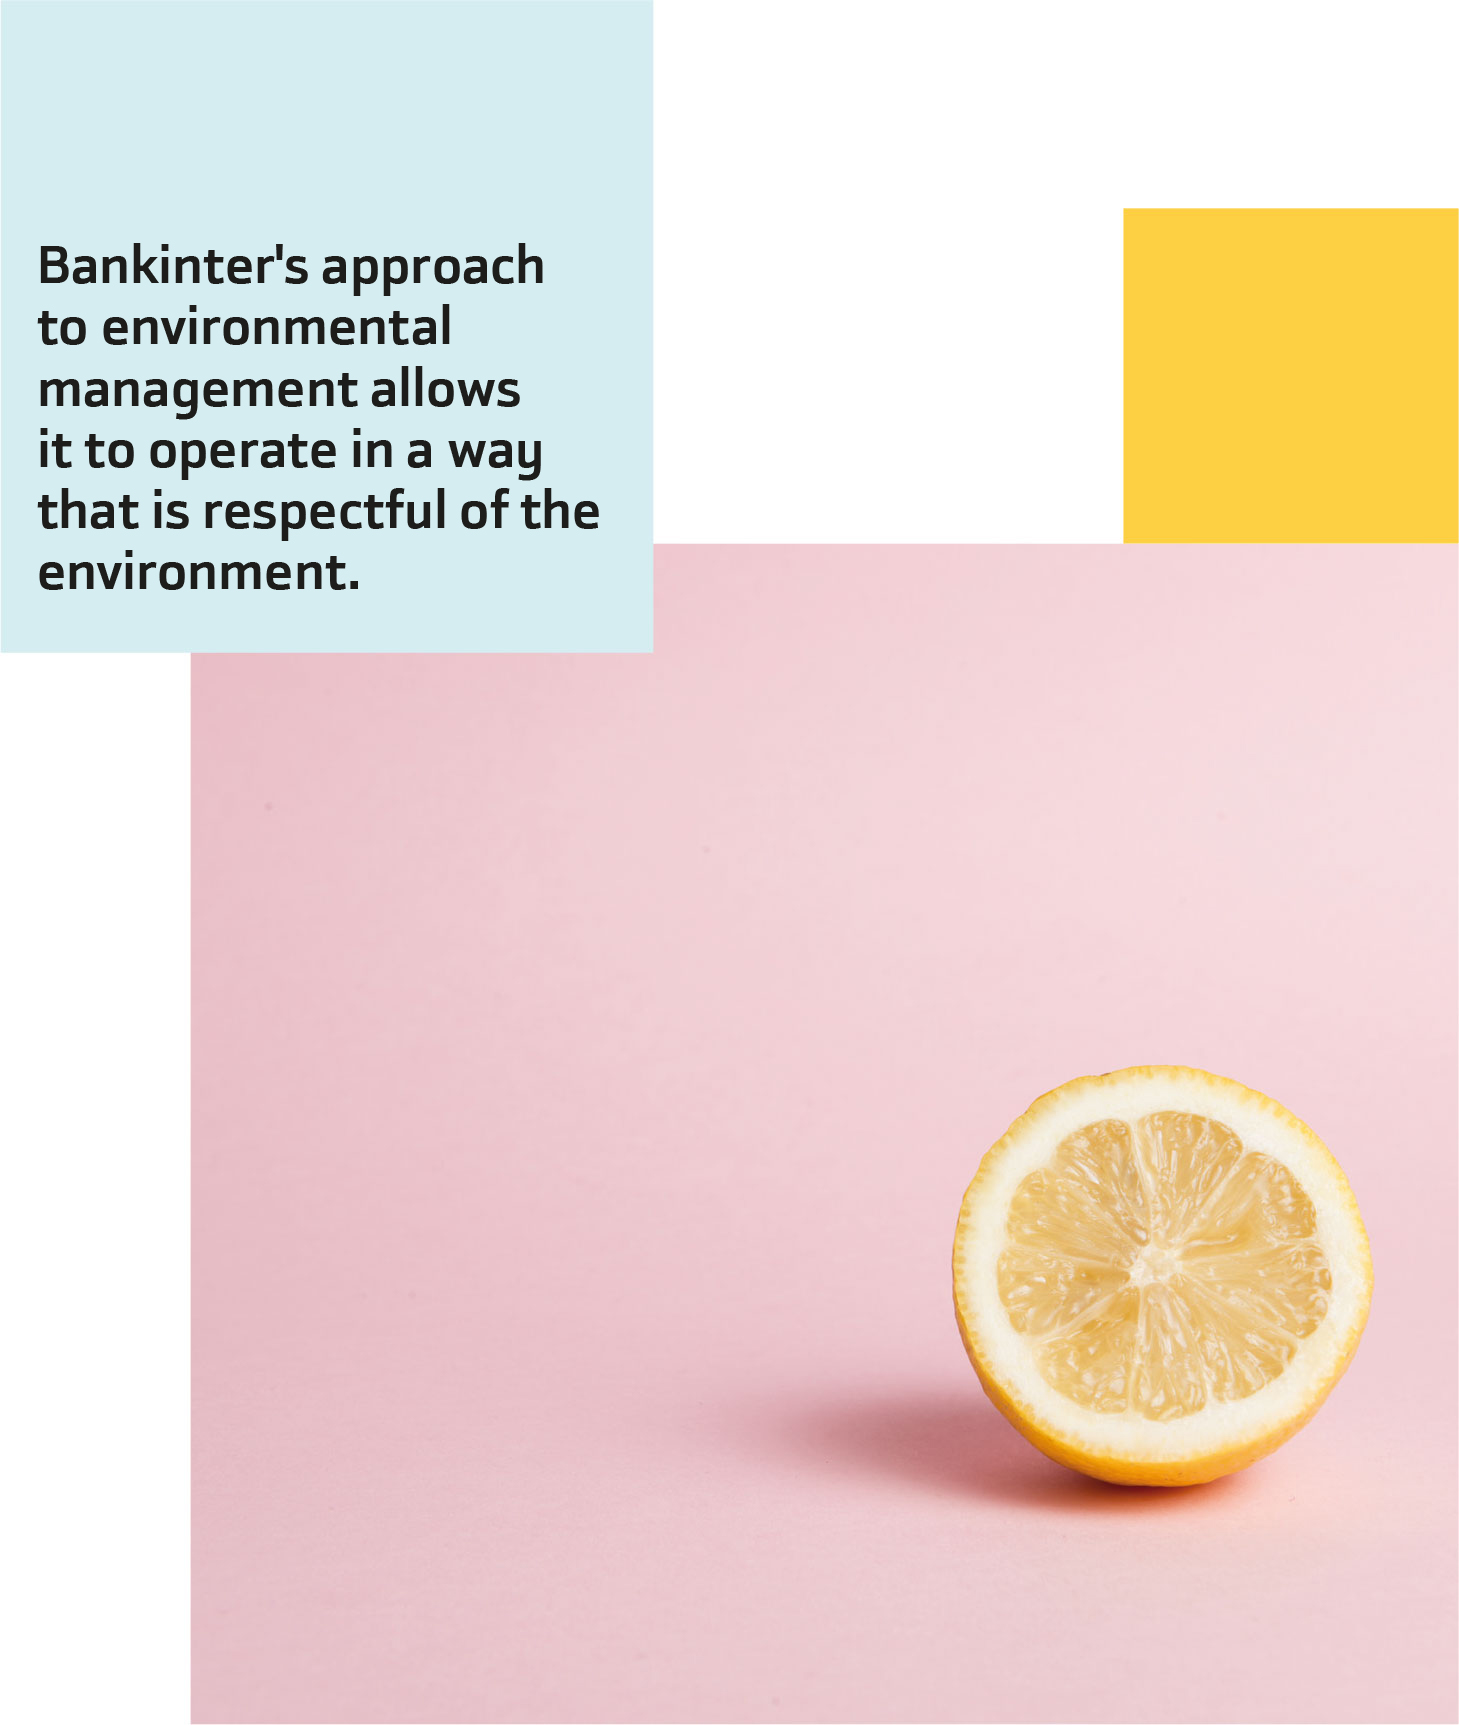 Bankinter's approach to environmental management allows it to operate in a way that is respectful of the environment.